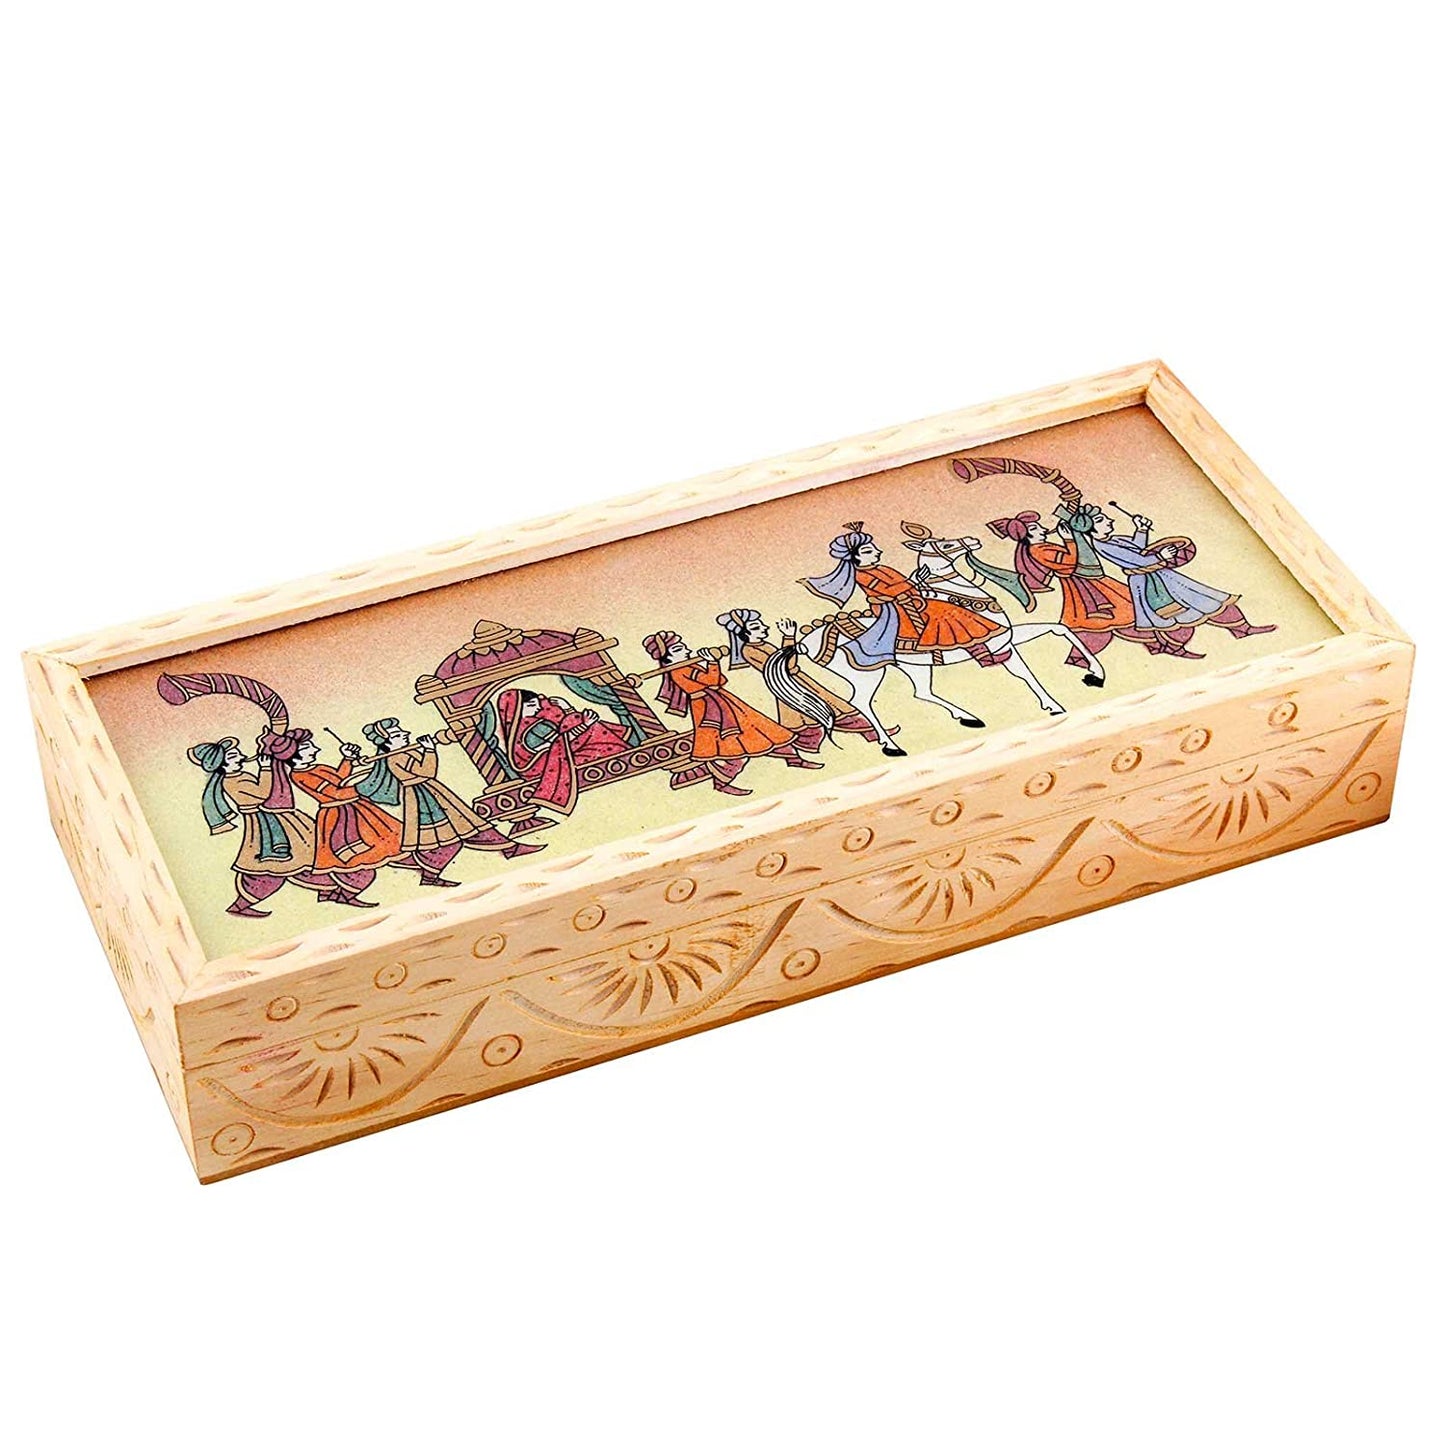 Handmade Wooden Gemstone Painted Jewellery Box For Decor And Gift